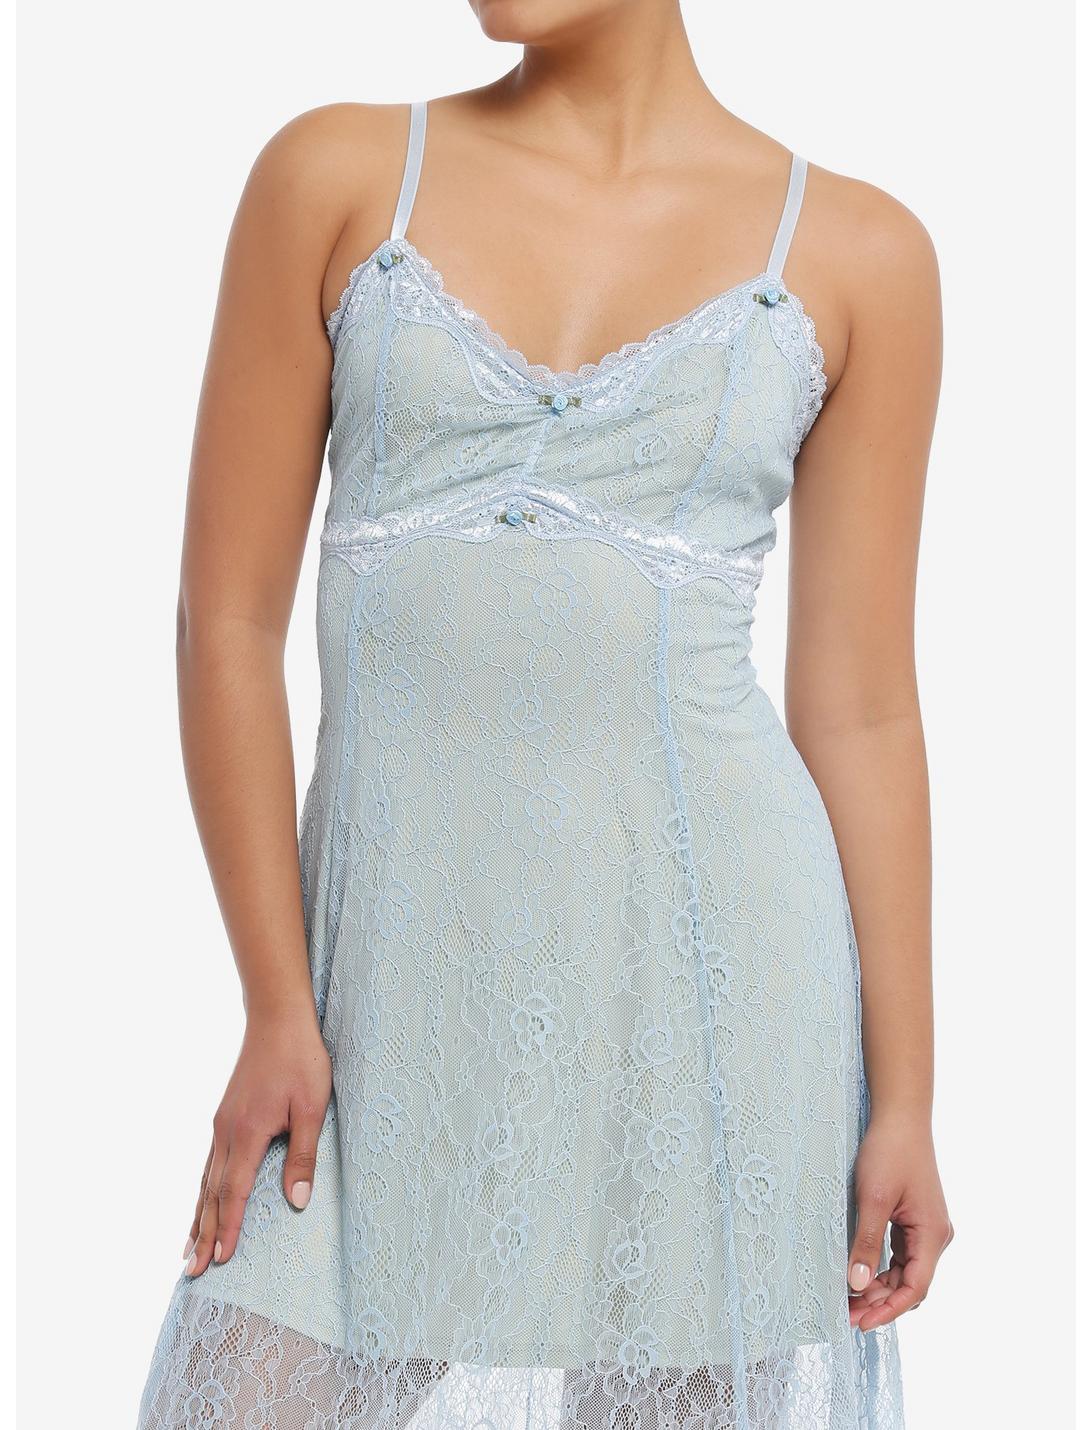 Thorn & Fable® Baby Blue Rosette Lace Cami Dress, GREEN, hi-res